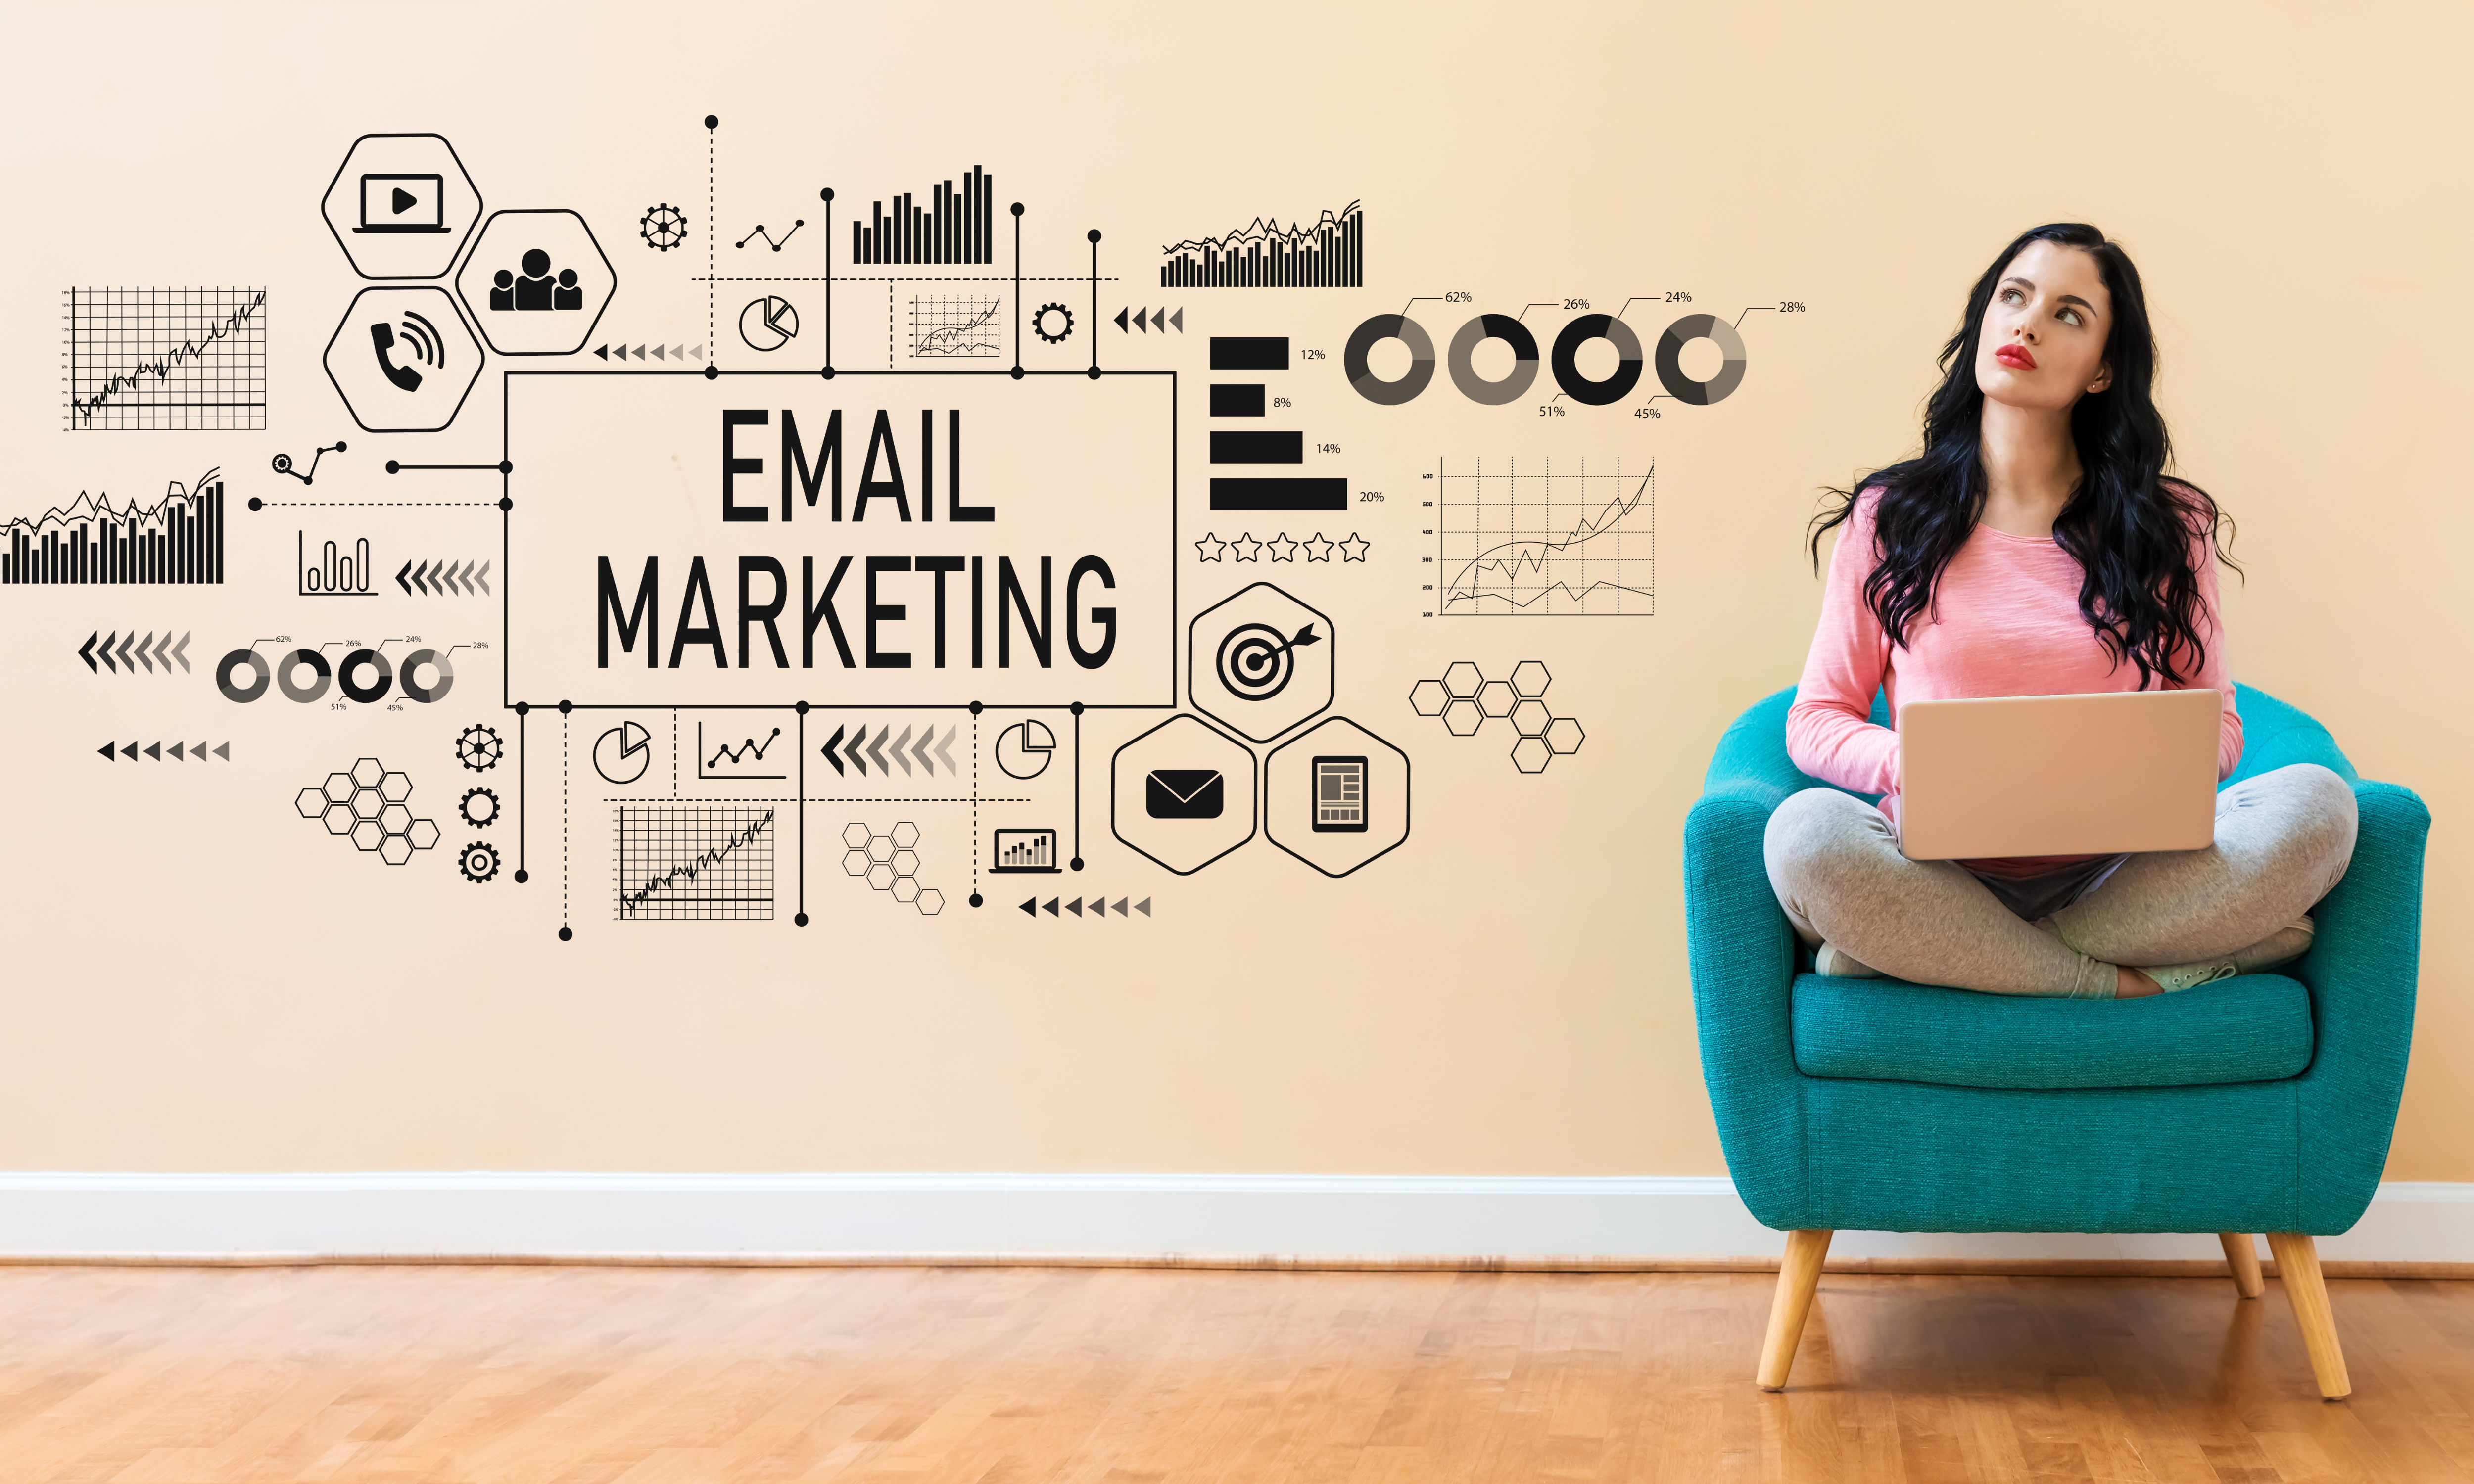 How to Make Email Marketing Really Work for Your Business